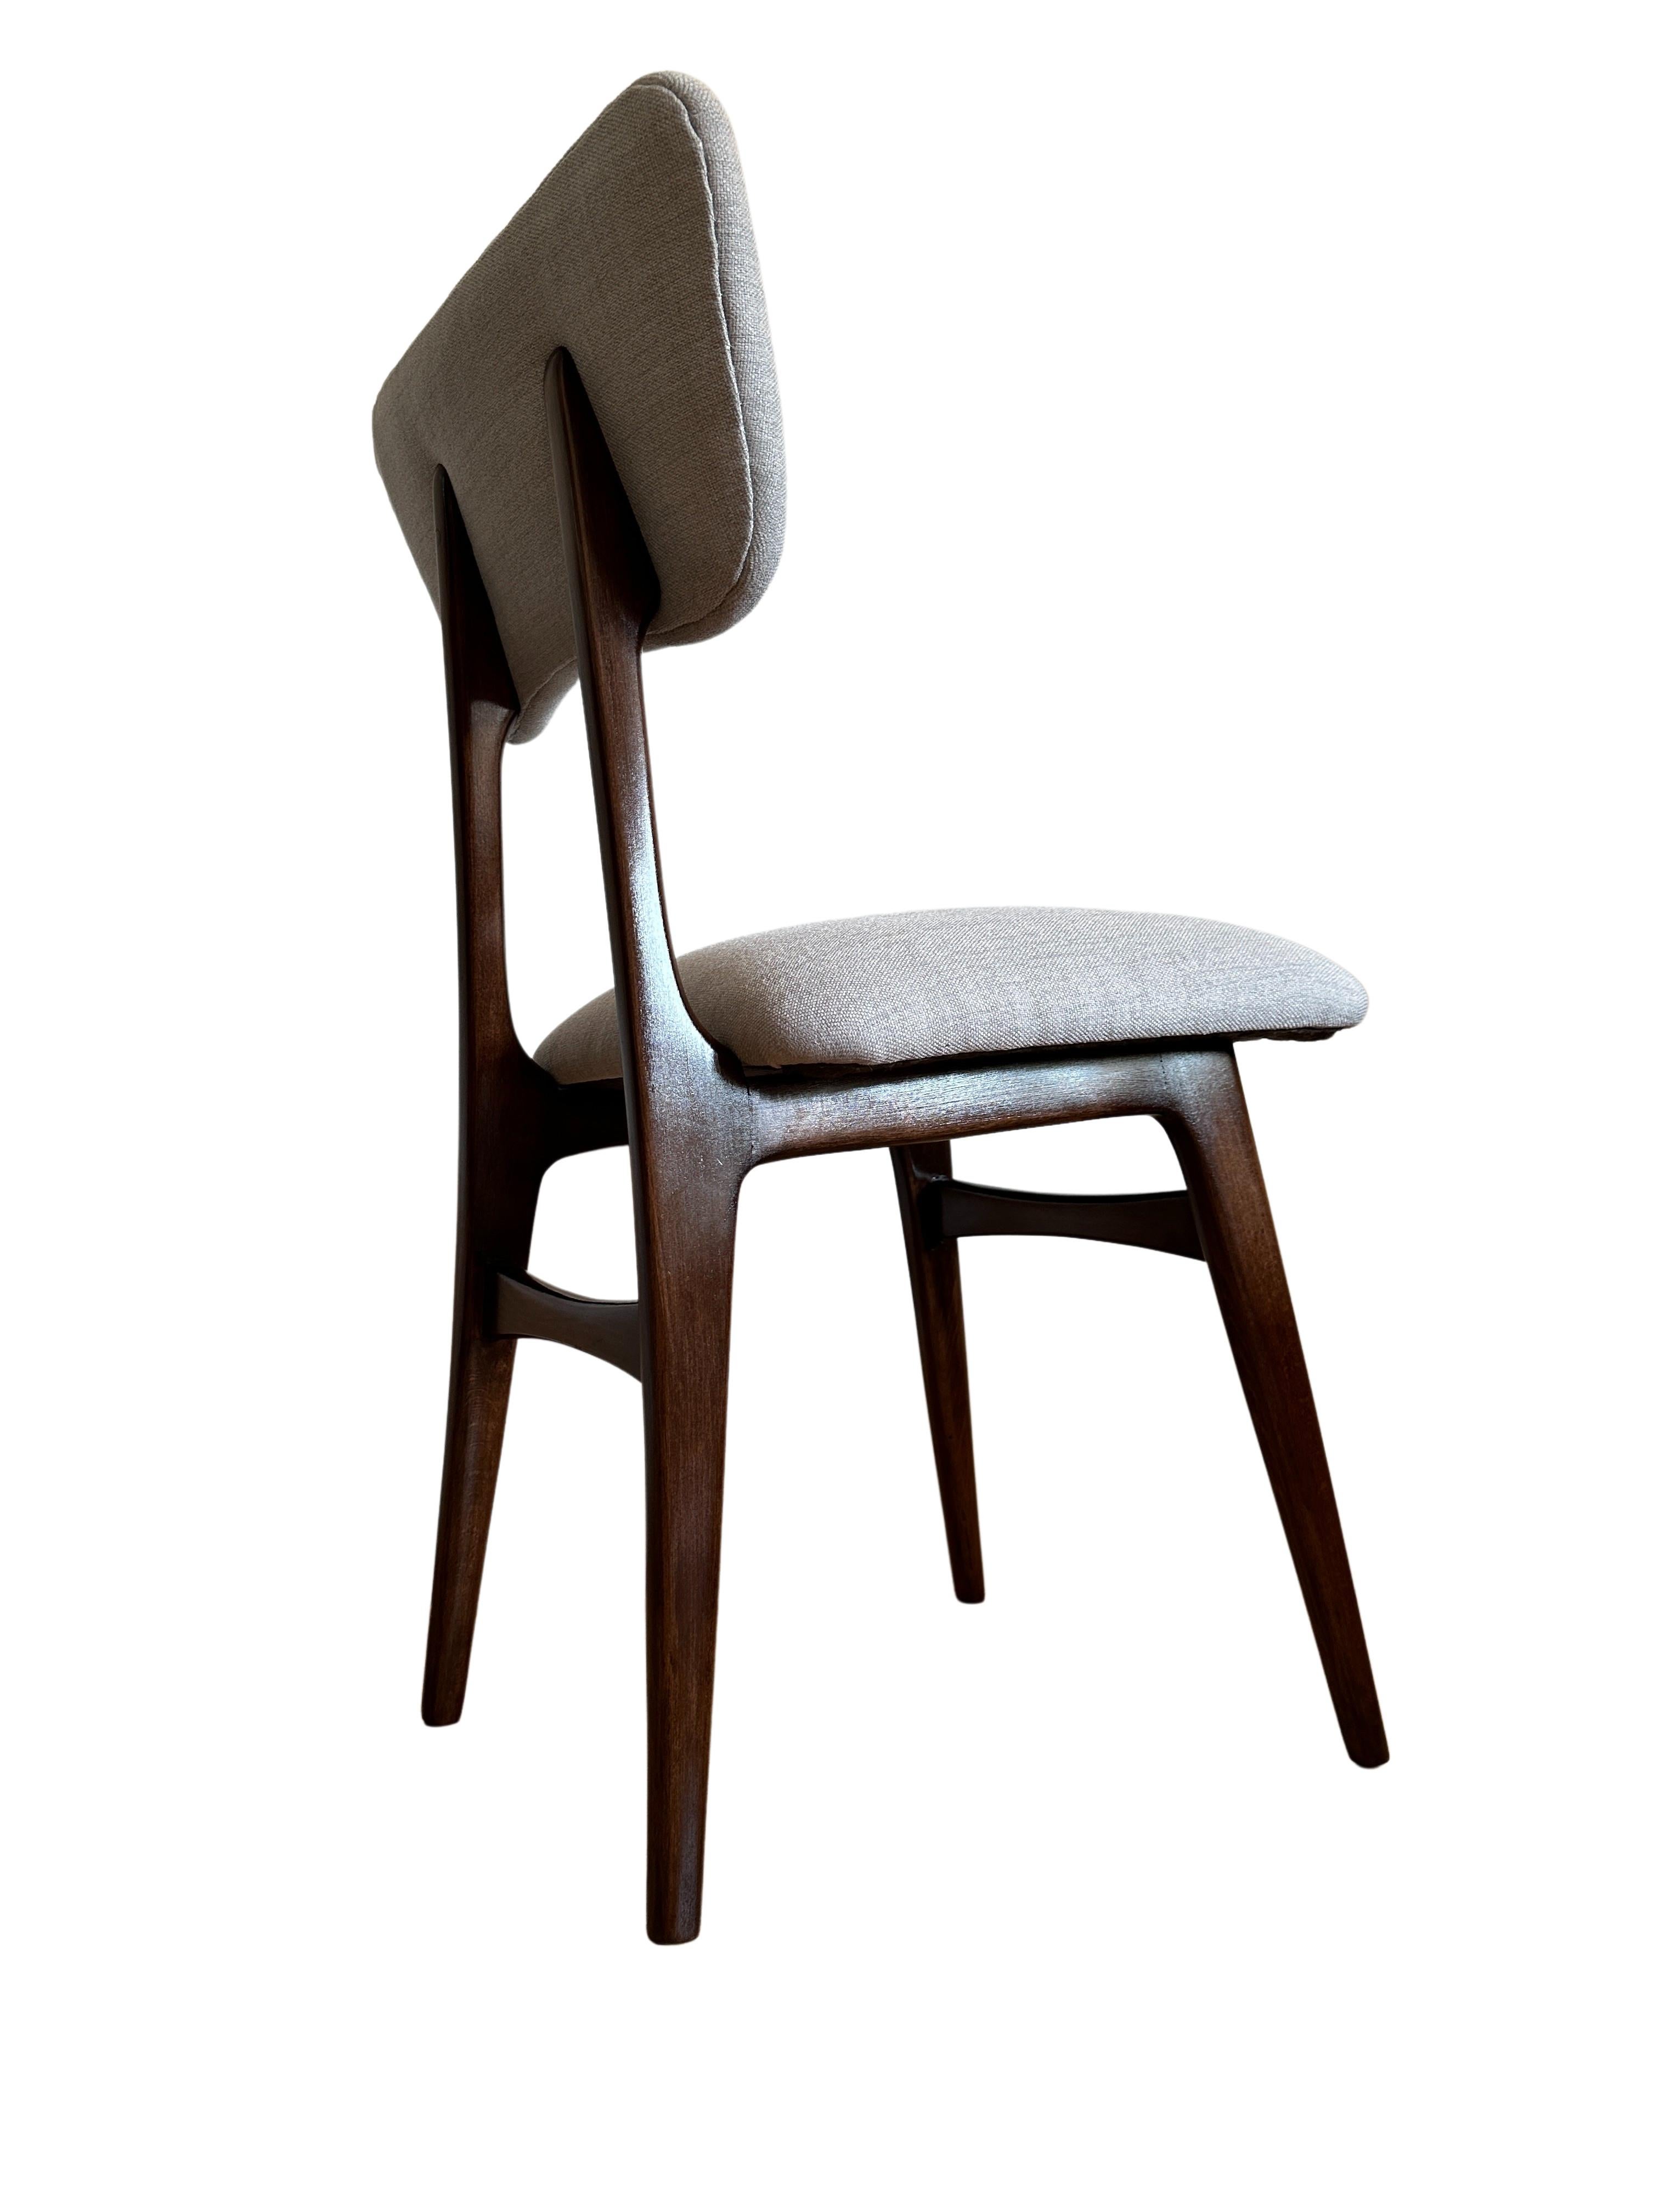 Set of 2 Midcentury Beige and Grey Dining Chairs, Europe, 1960s For Sale 7